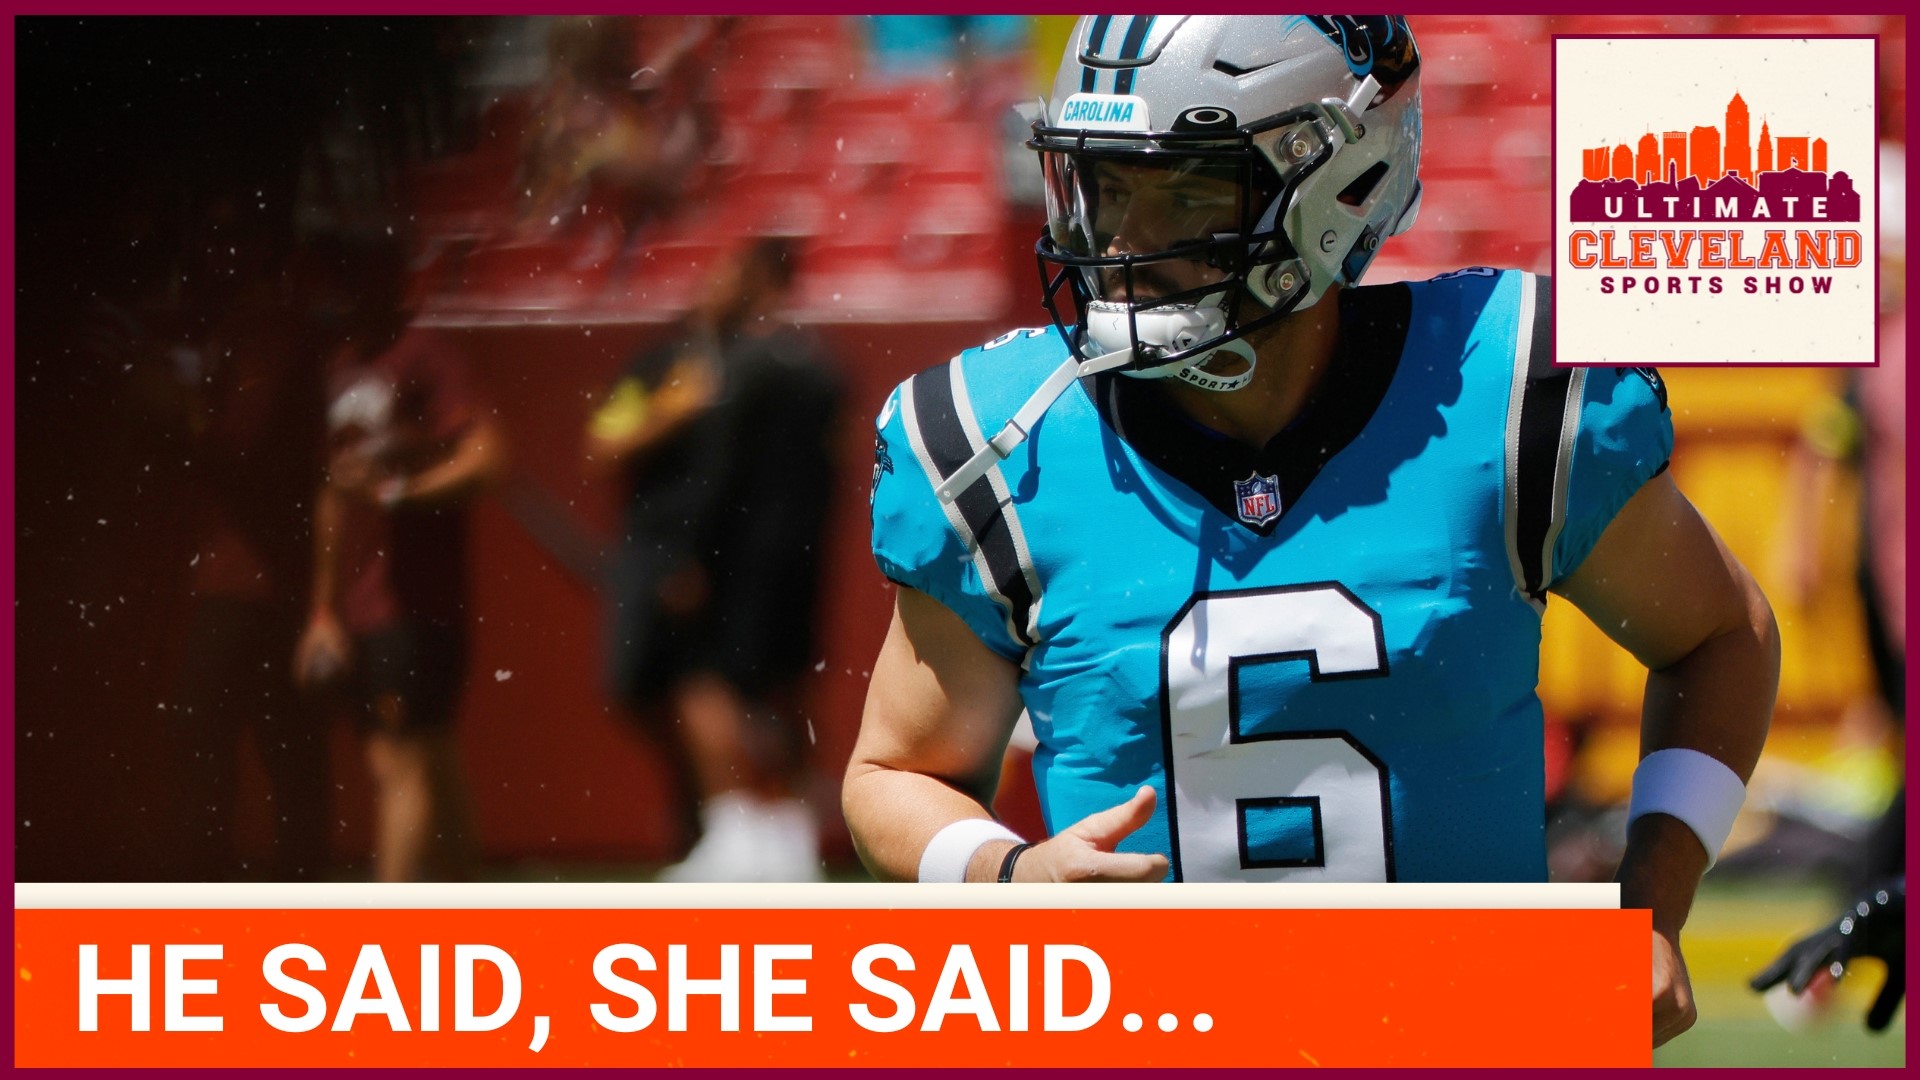 On Monday, Cynthia Frelund said on a podcast she had an exchange with Baker Mayfield where he told her he was going to "f**k up" the Cleveland Browns.